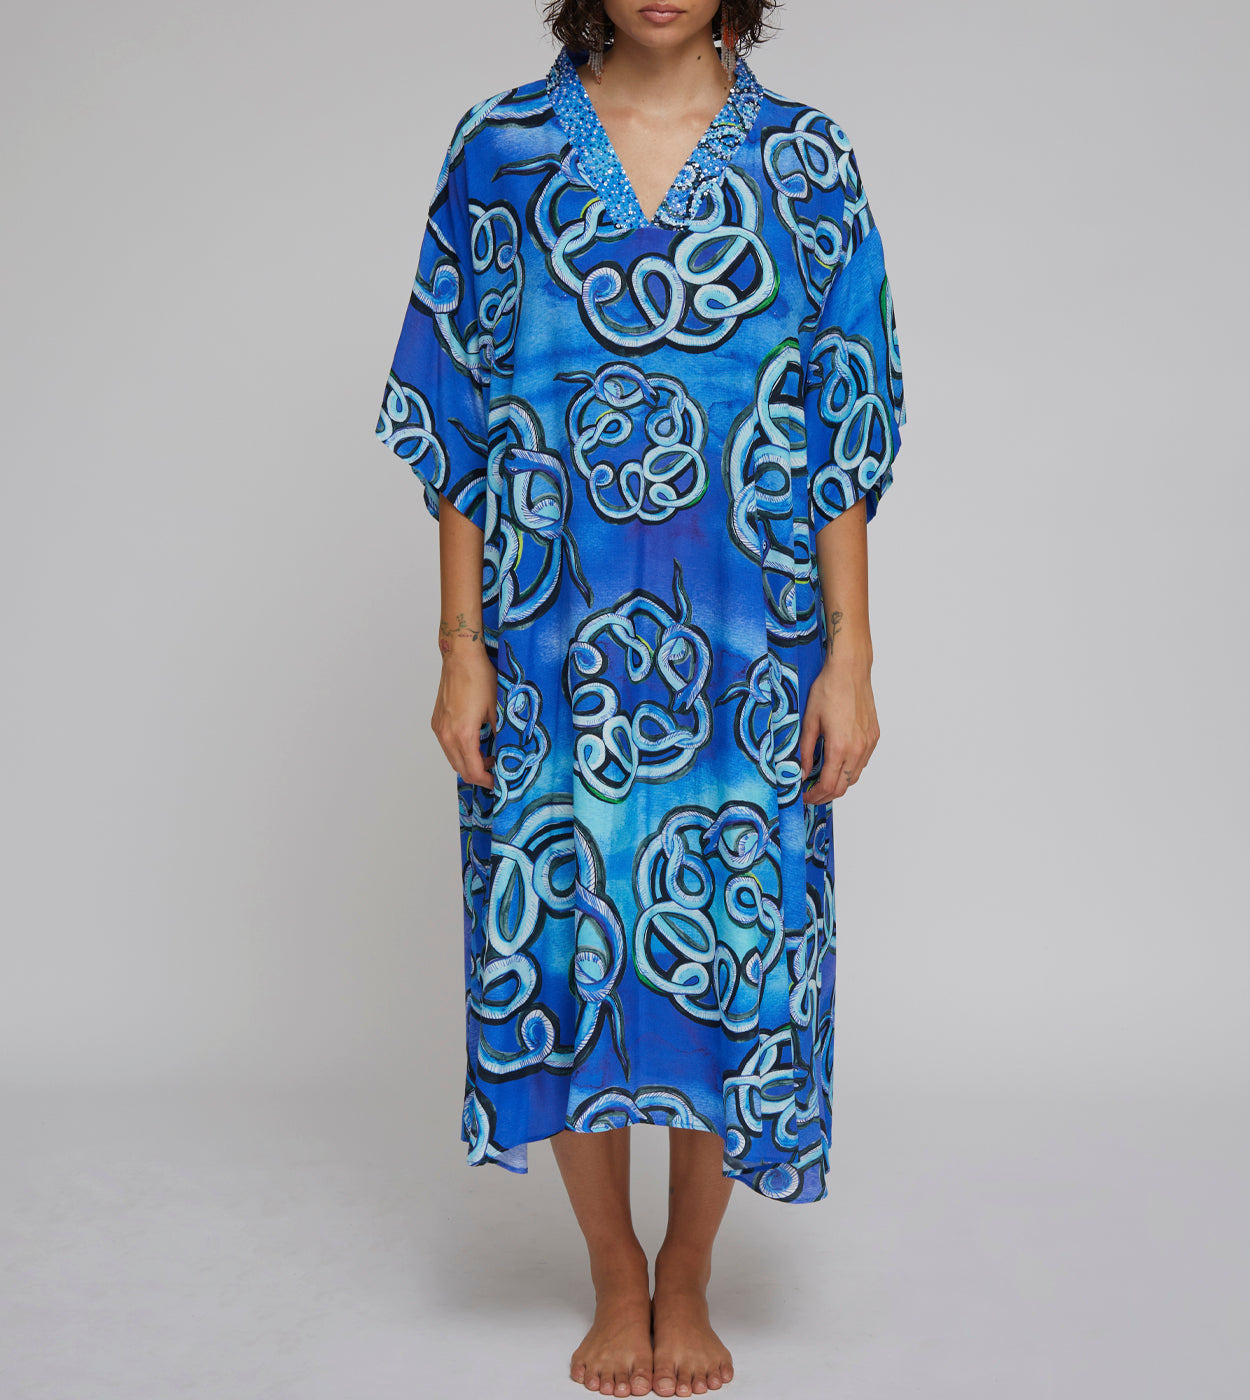 THE OVER CAFTAN